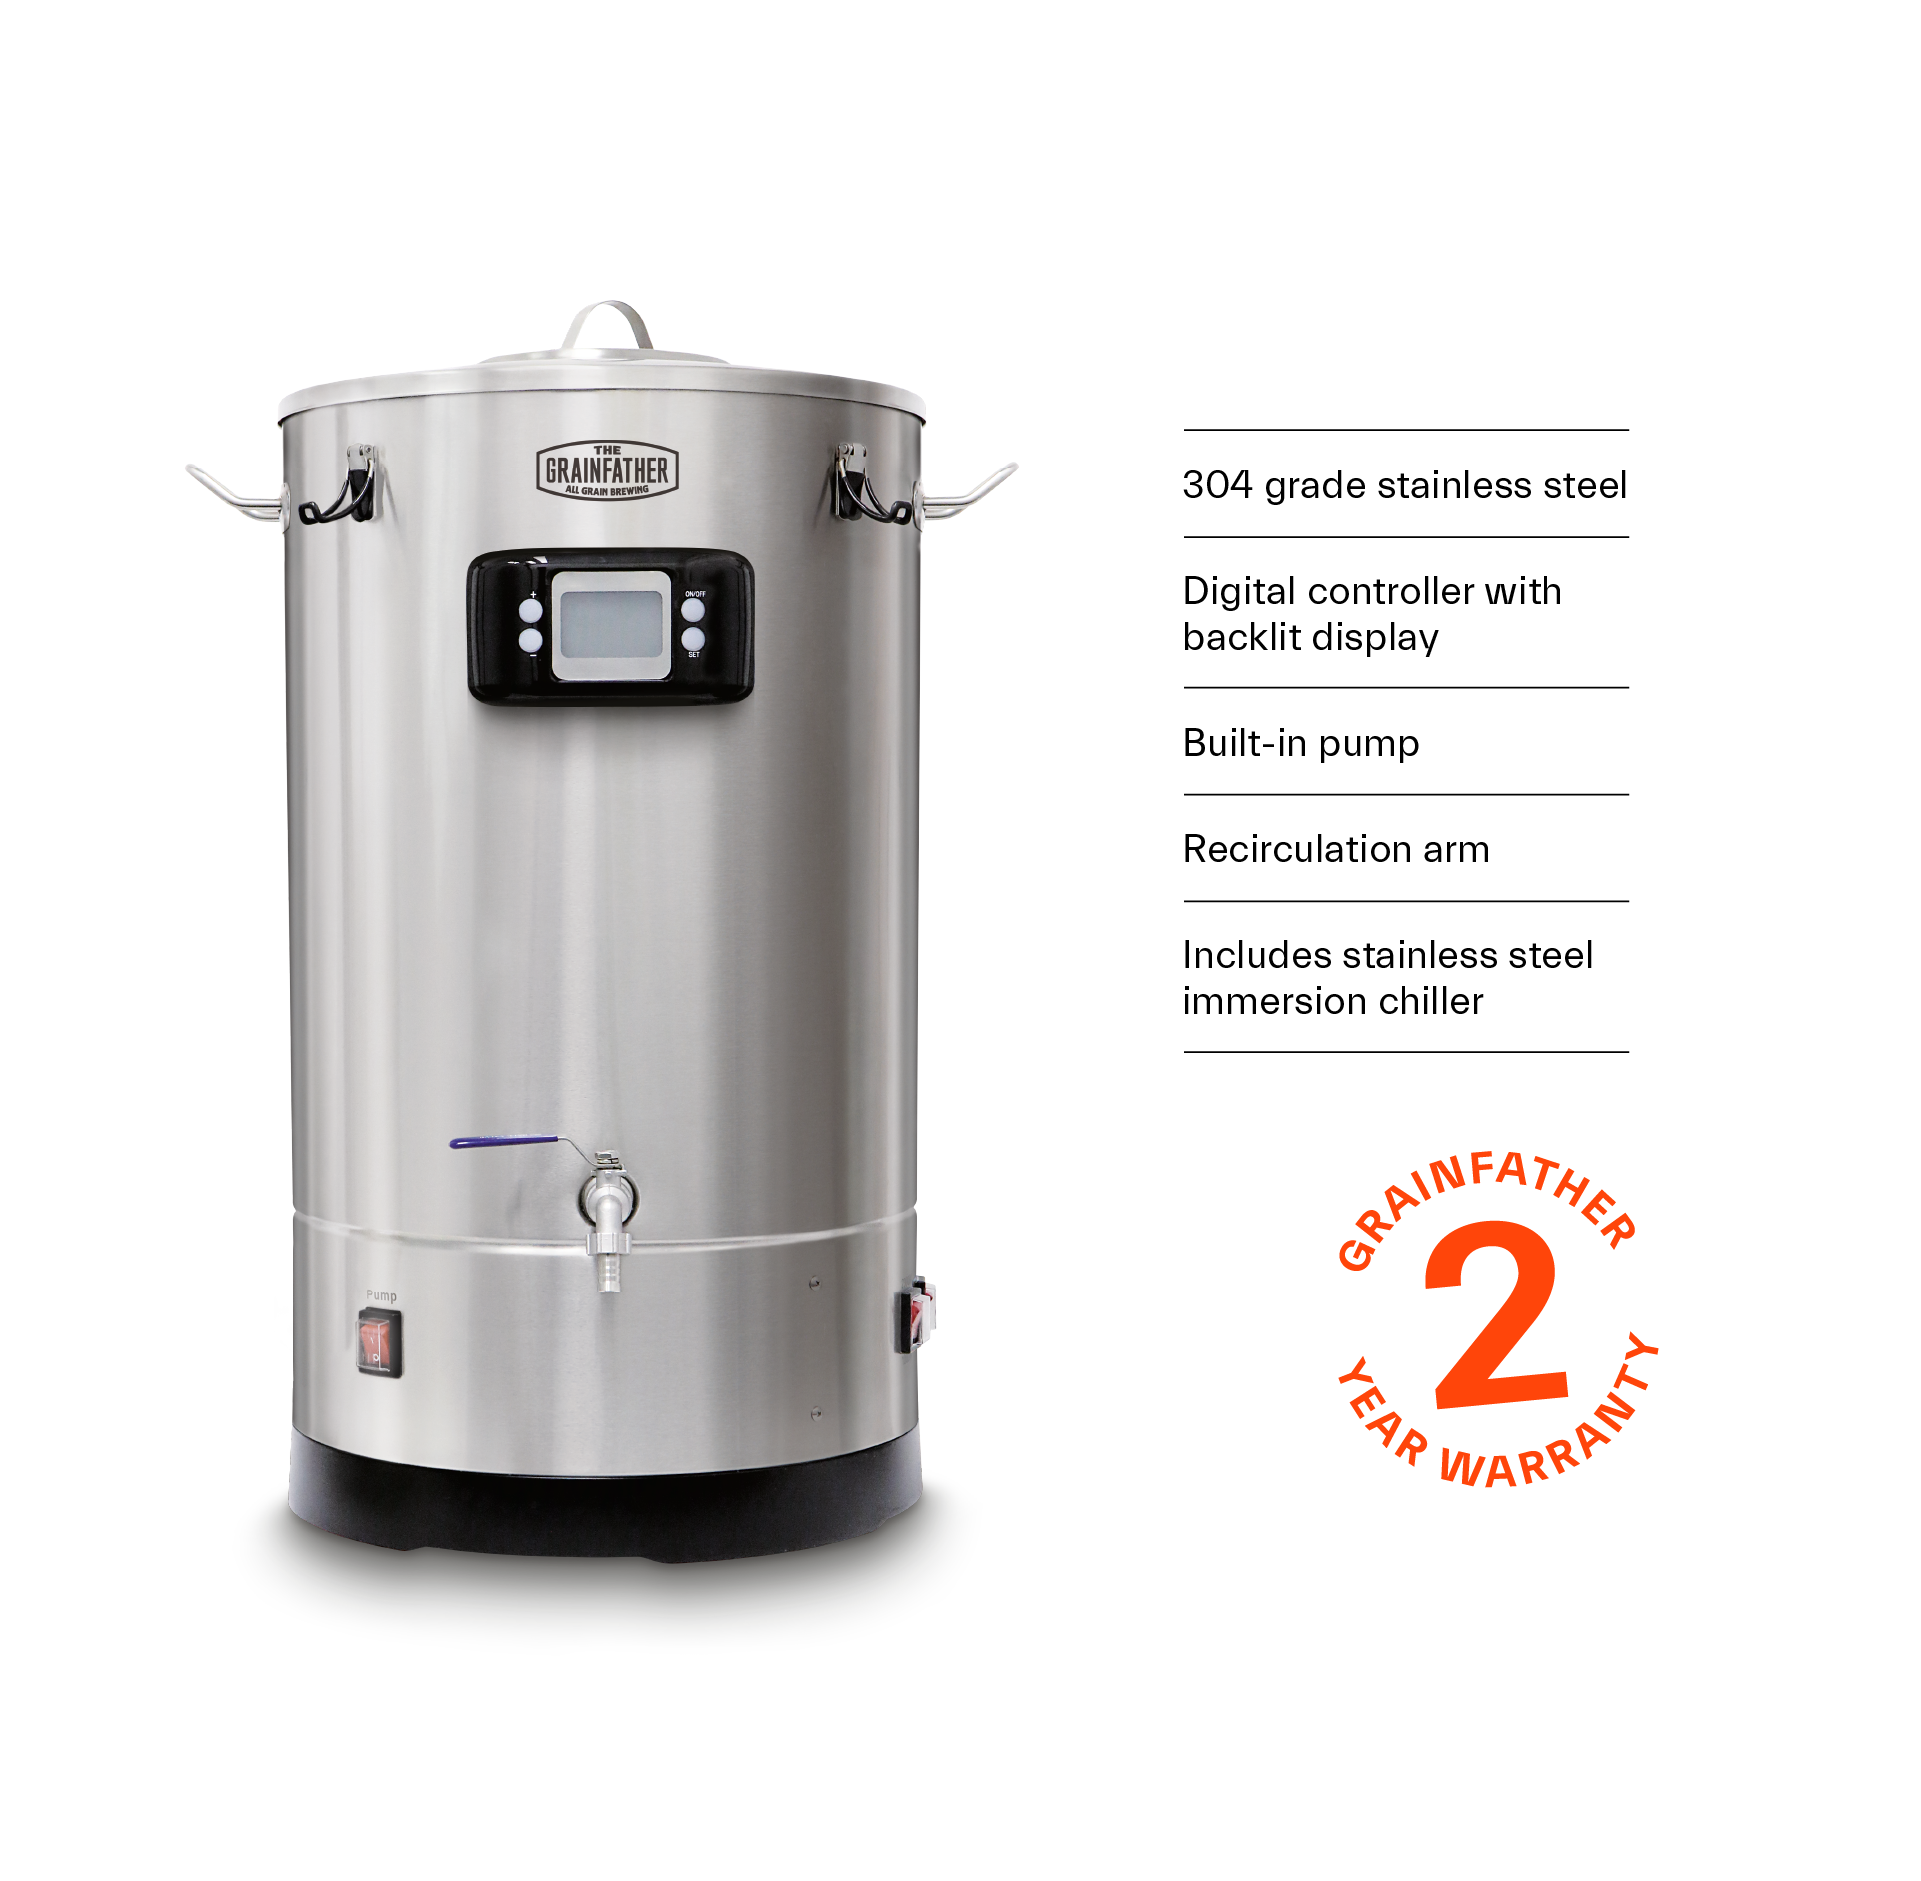 Grainfather S40 Features